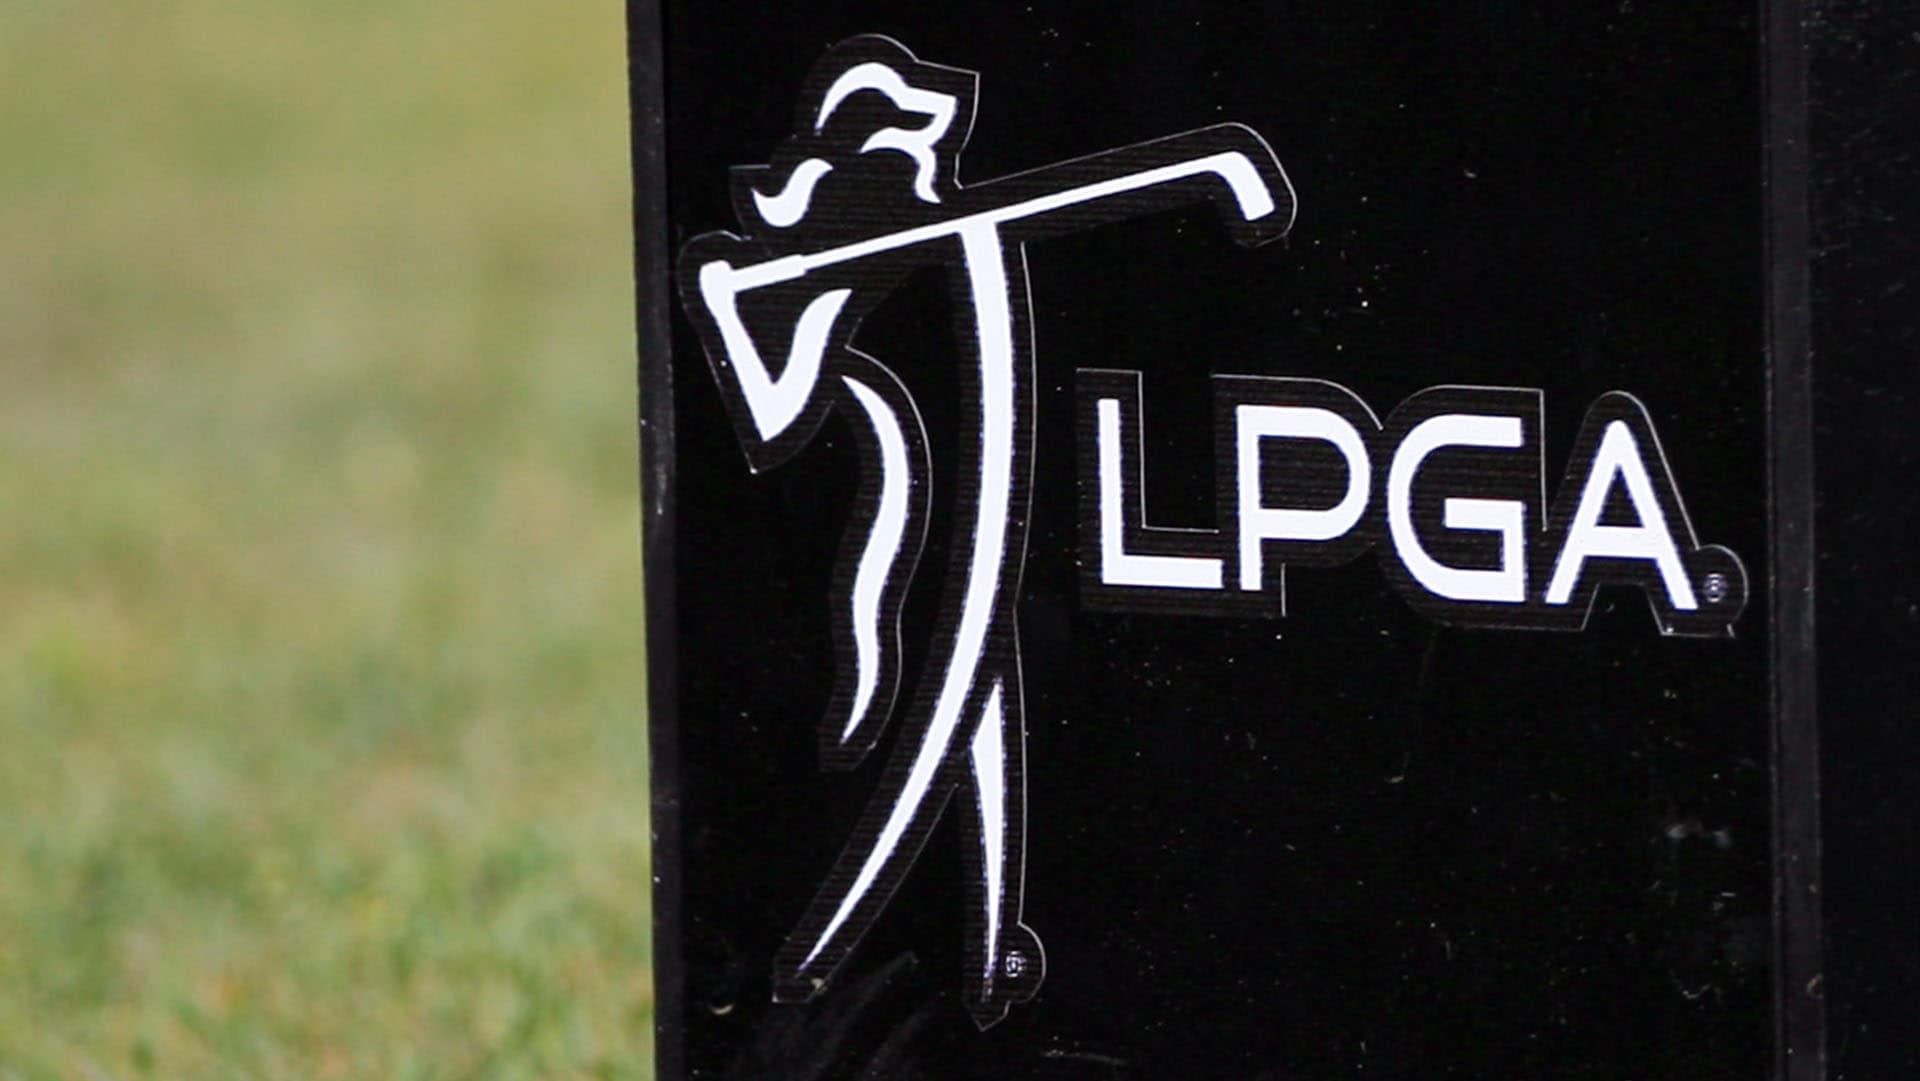 In the reboot of EA Sports PGA Tour, the LPGA will be ‘in the game.’